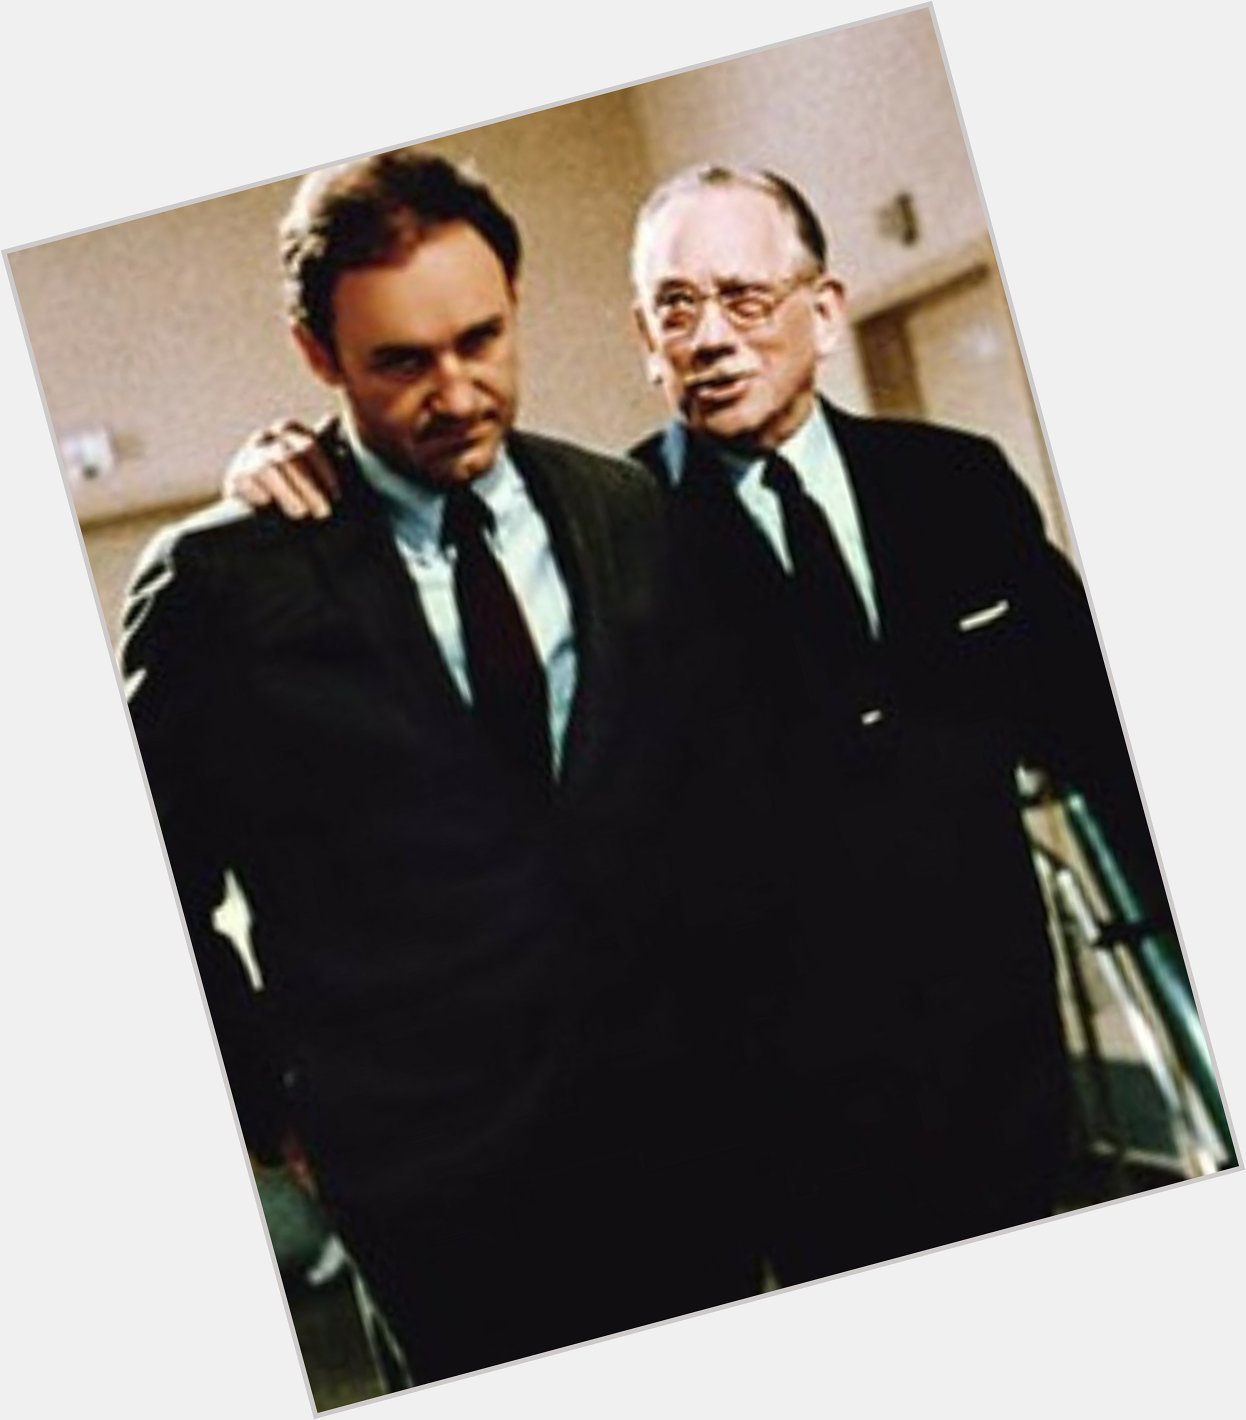 Happy 90th BDay to Gene Hackman!

Here w/Melvyn Douglas in I NEVER SANG FOR MY FATHER (1970) 